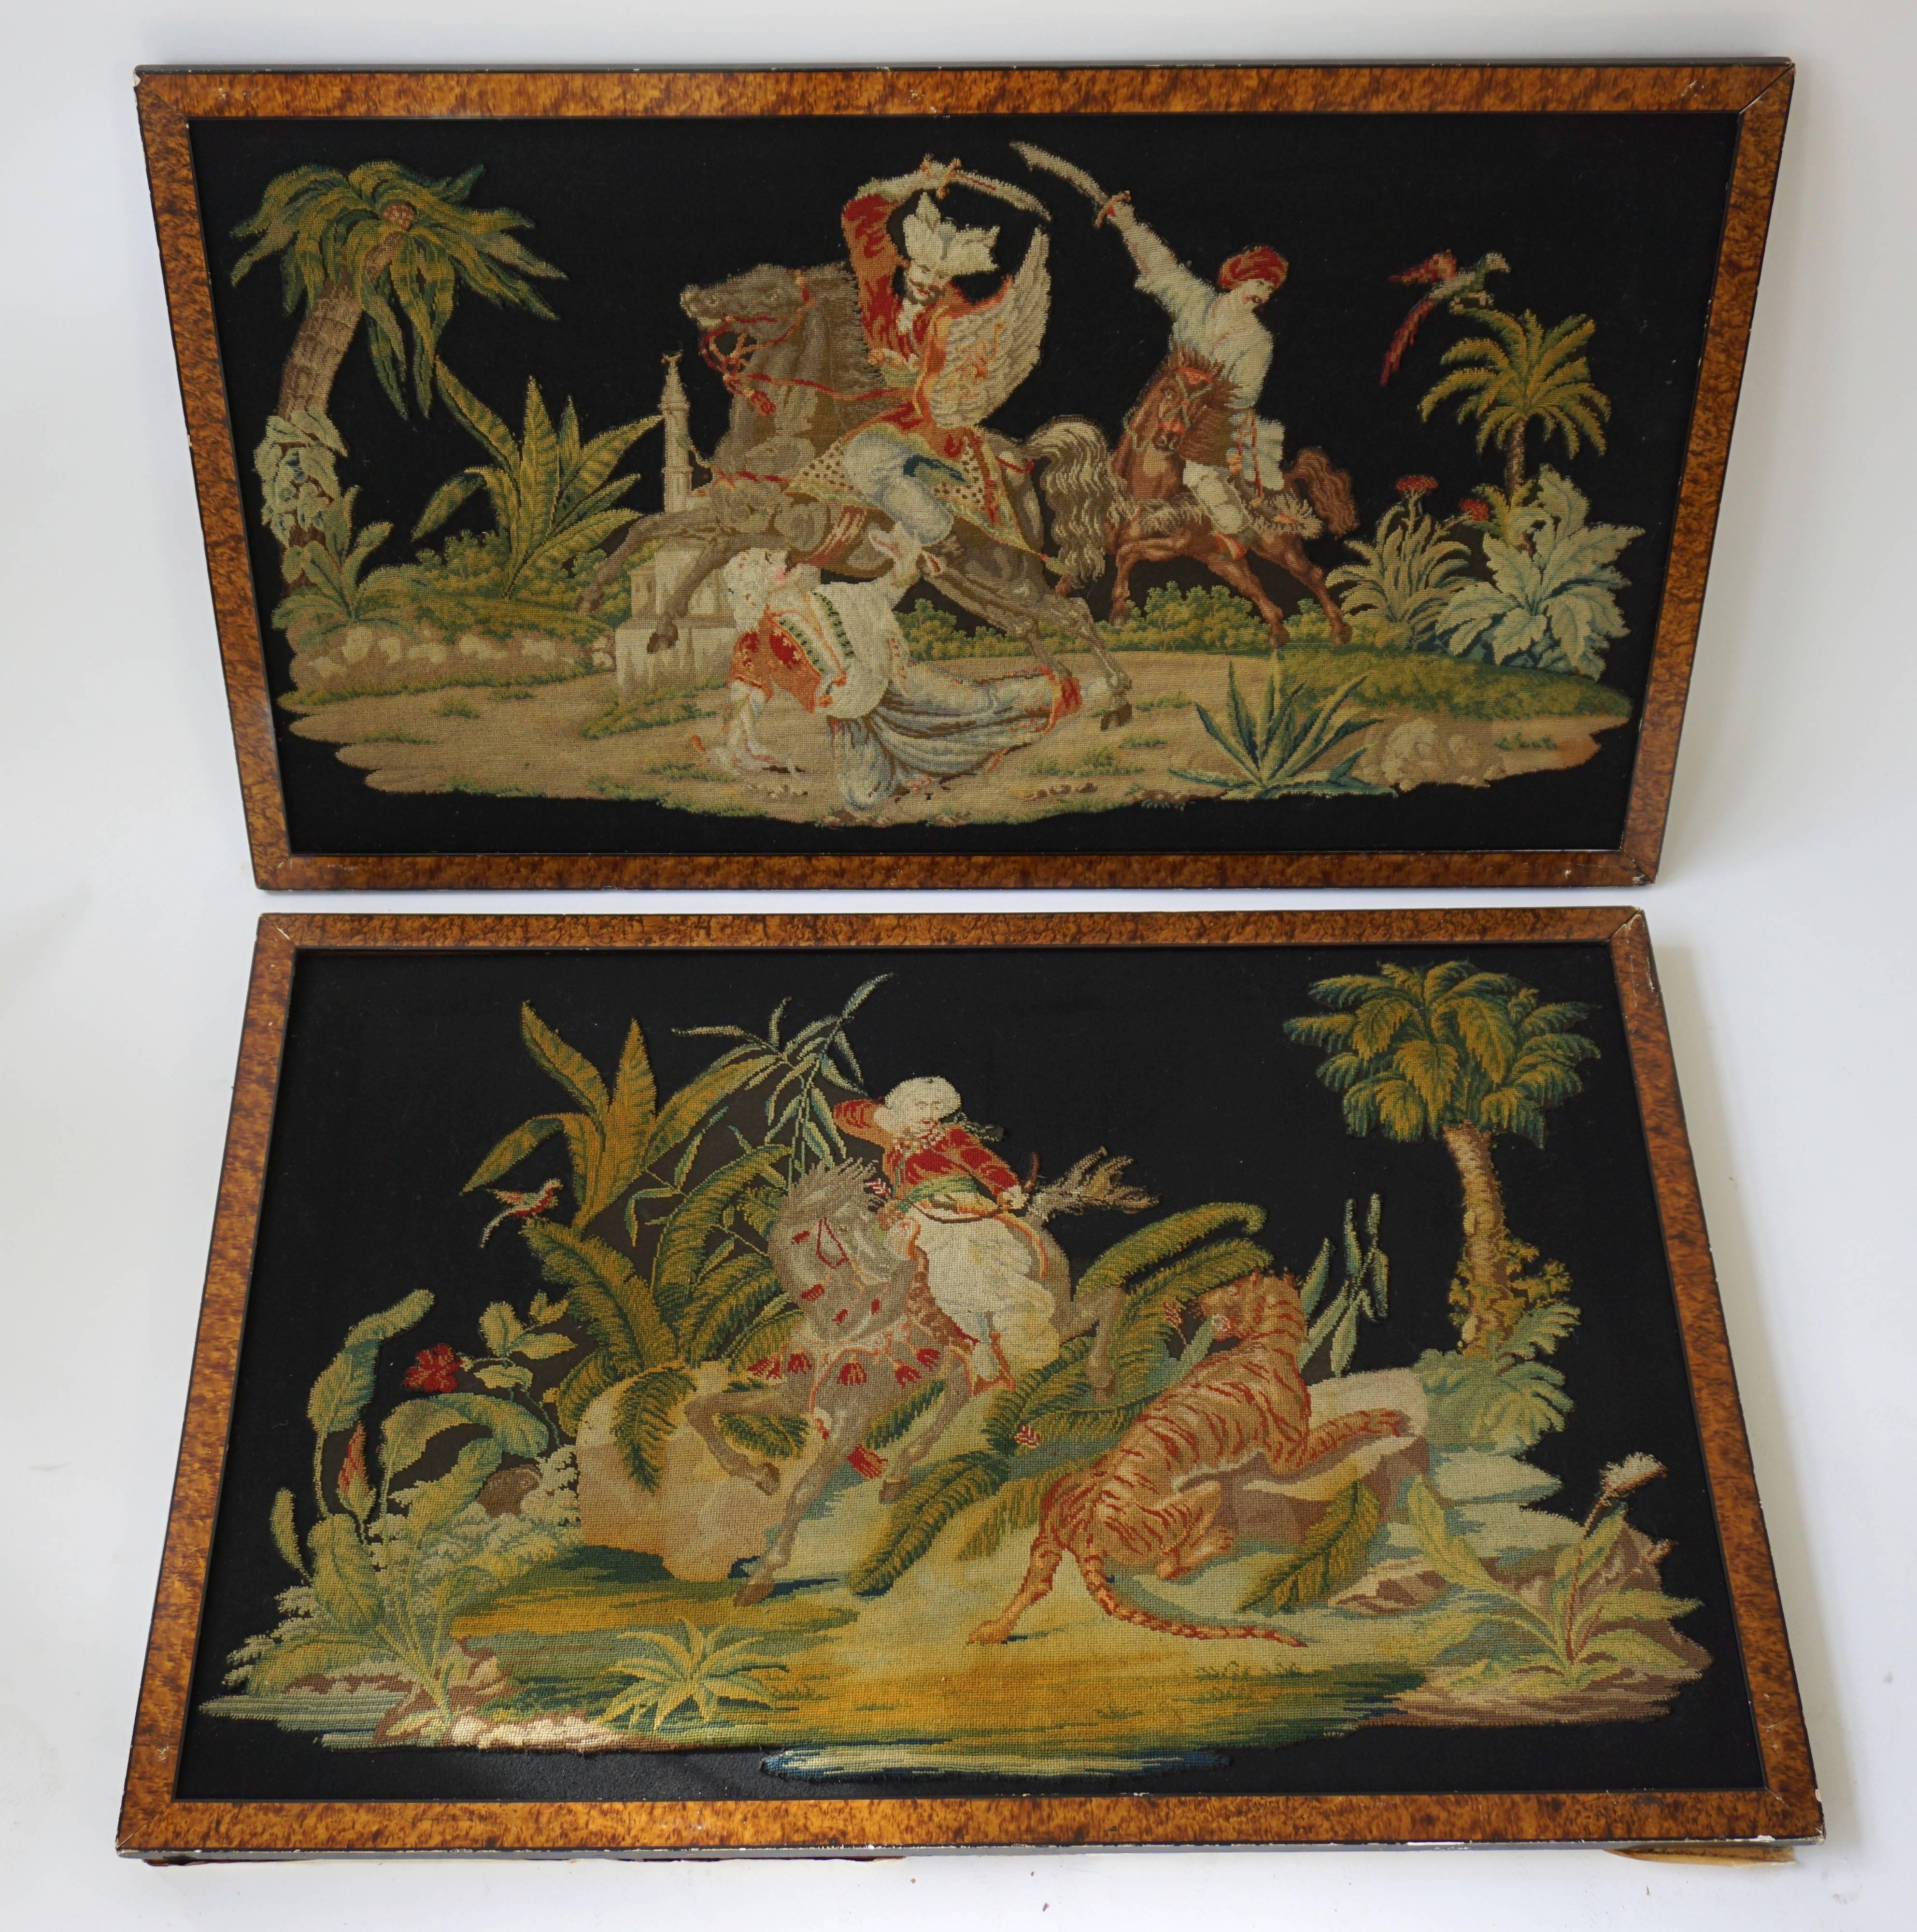 A pair of gros – point stitched panels representing orientalist scenes: One with a tiger hunt and the other with a battle scene, both in a setting of tropical vegetation on a black ground, in burl walnut frames, mid-19th century.
Dimensions: 90 cm